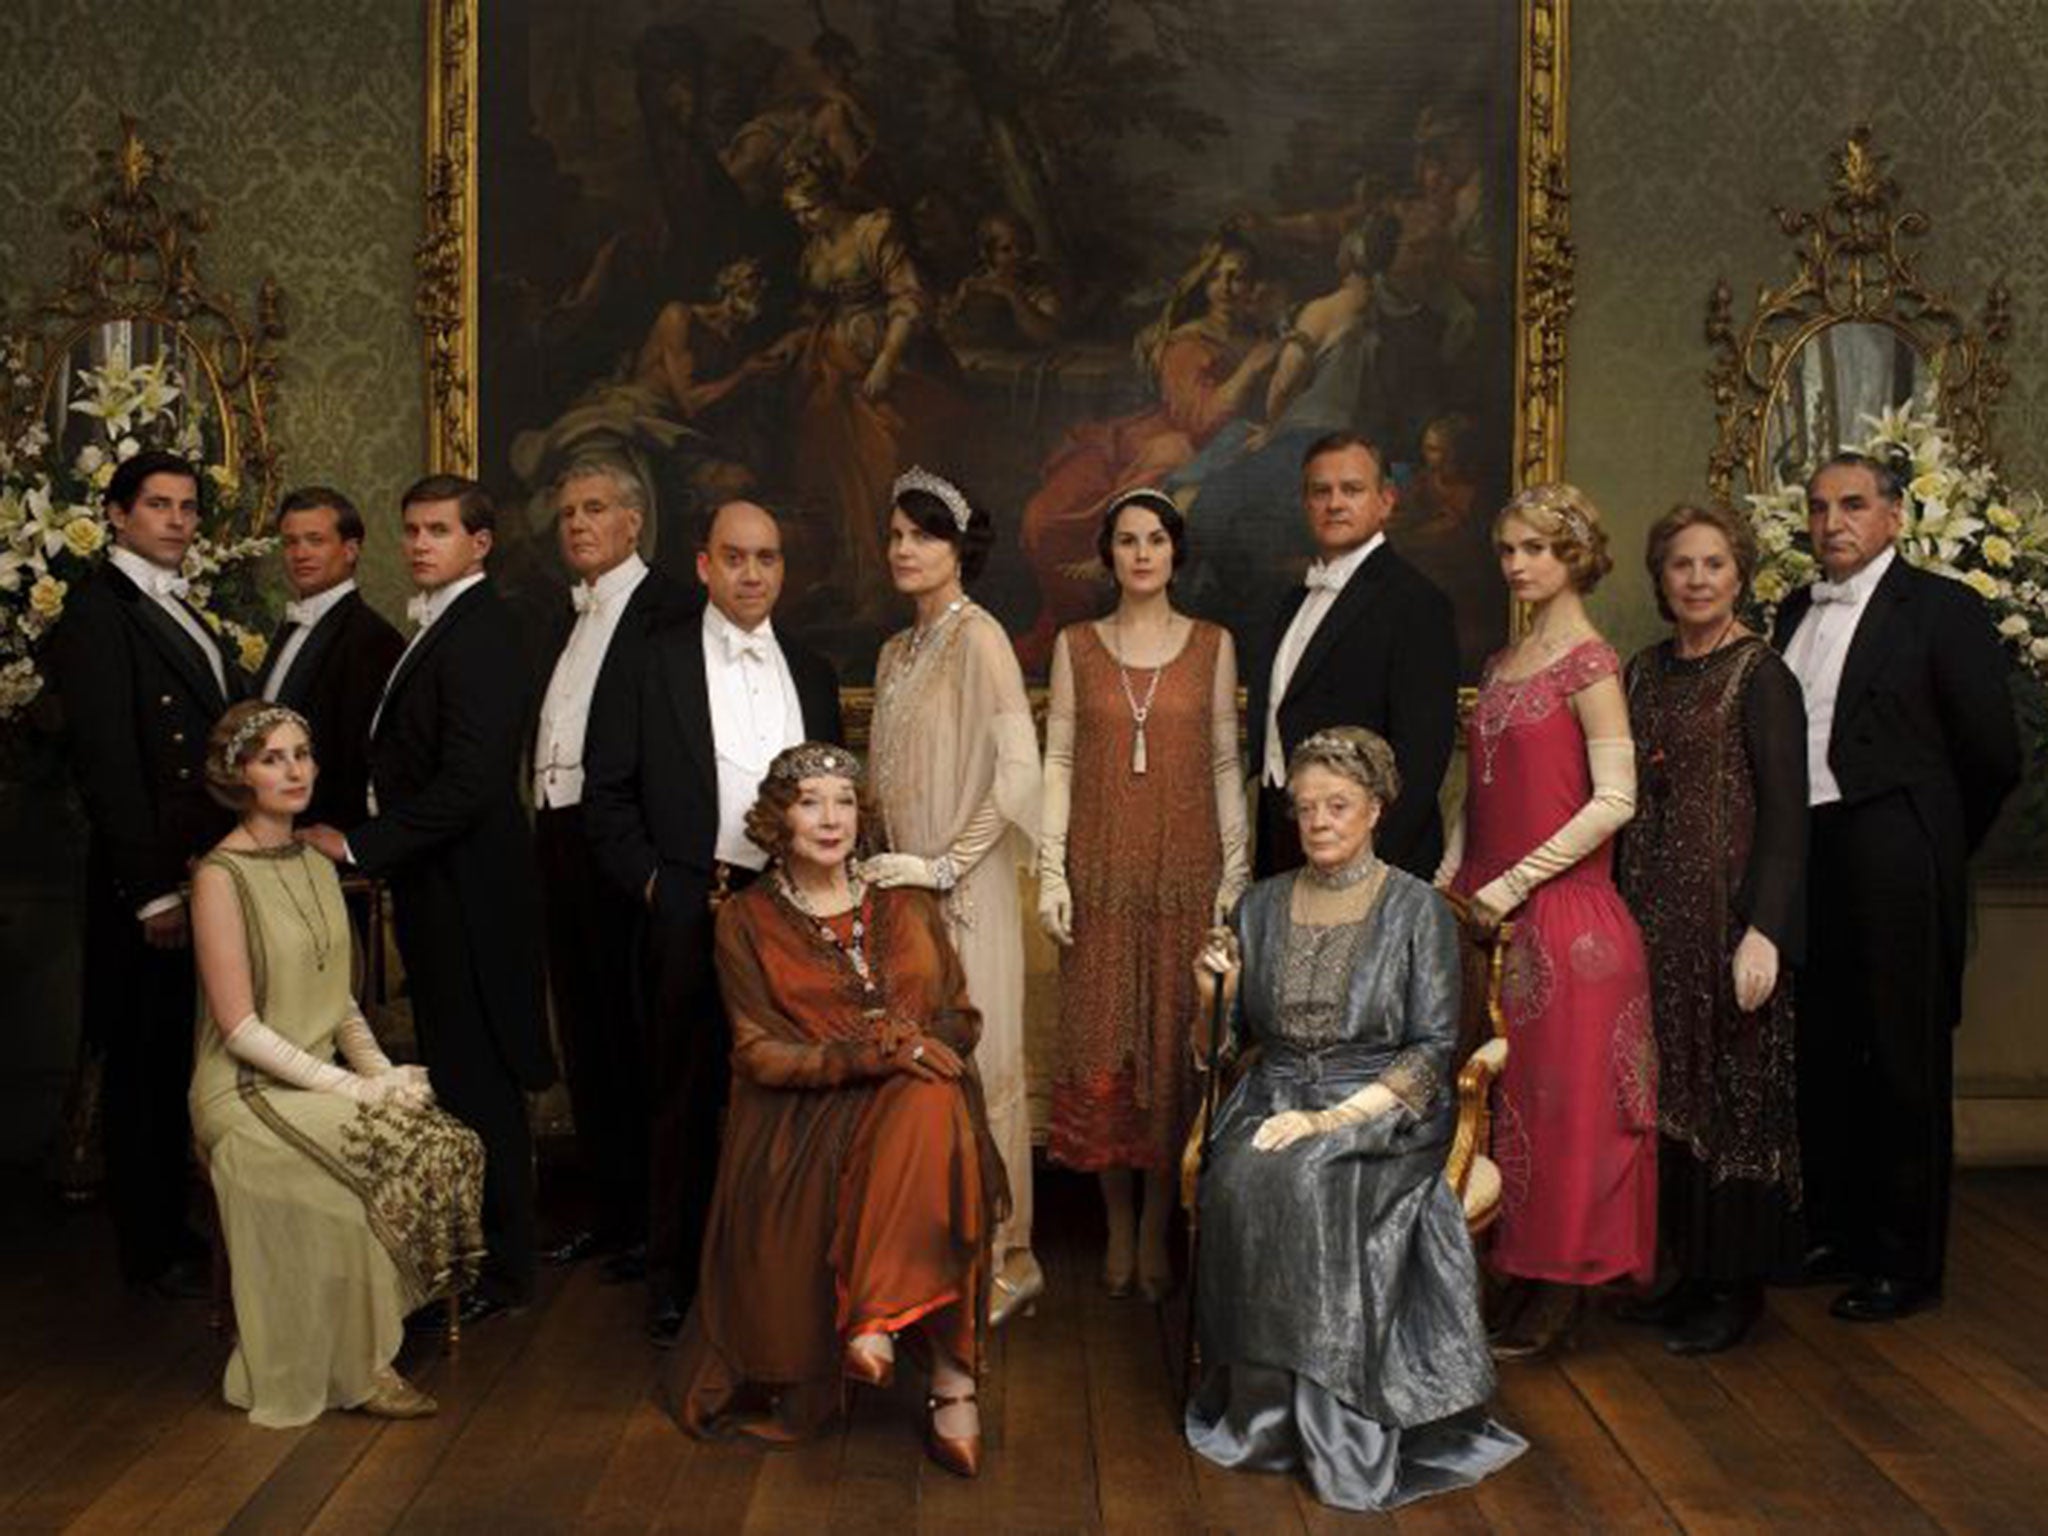 Downton Abbey will return to our living rooms for a sixth series next year